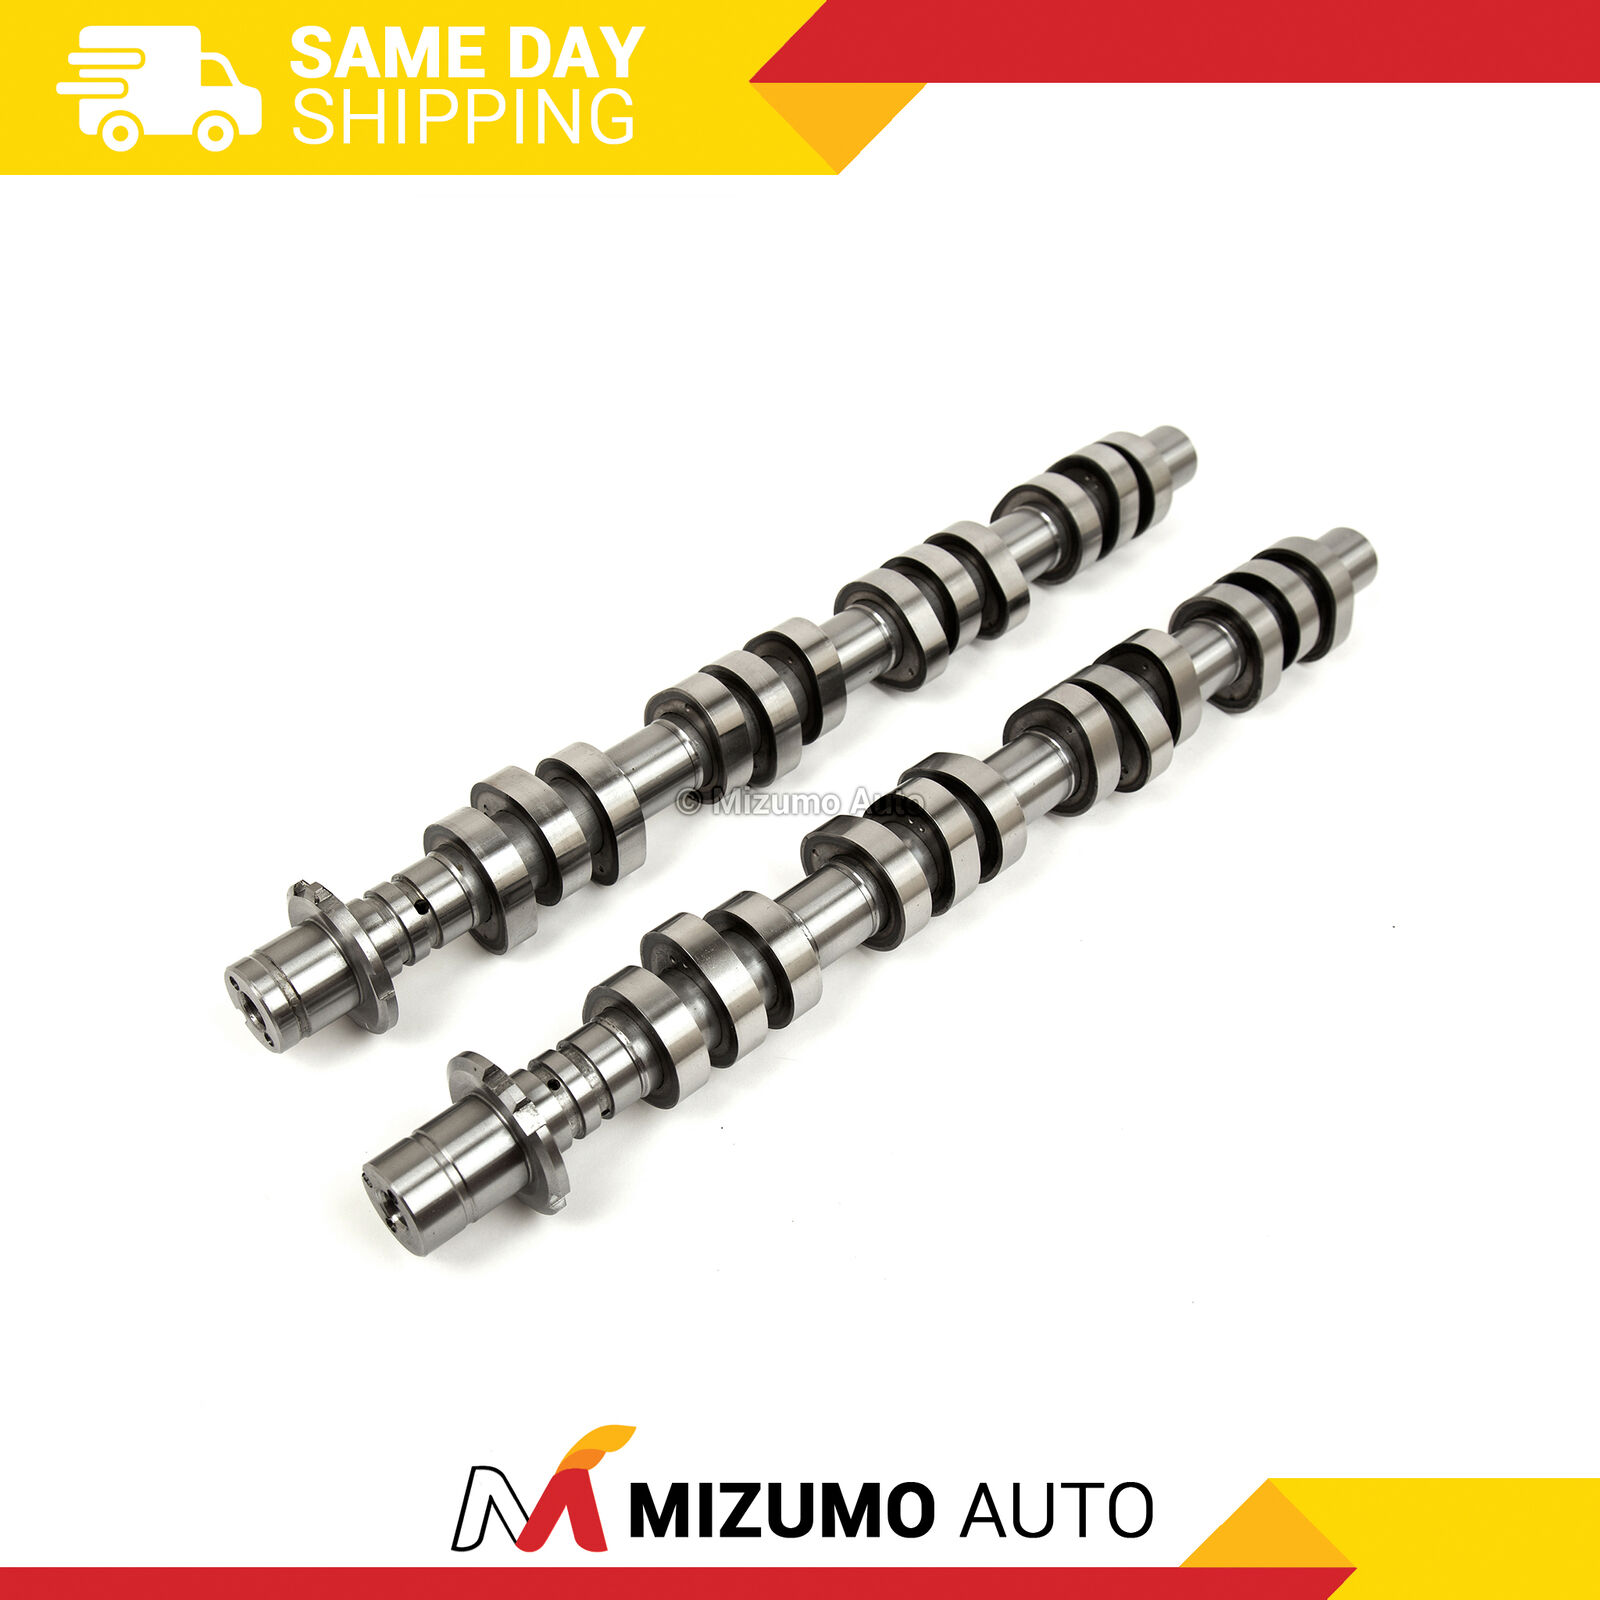 Camshafts Fit 05-14 Ford Explorer F150 Mustang Mercury Mountaineer 4.6L 5.4L 3V